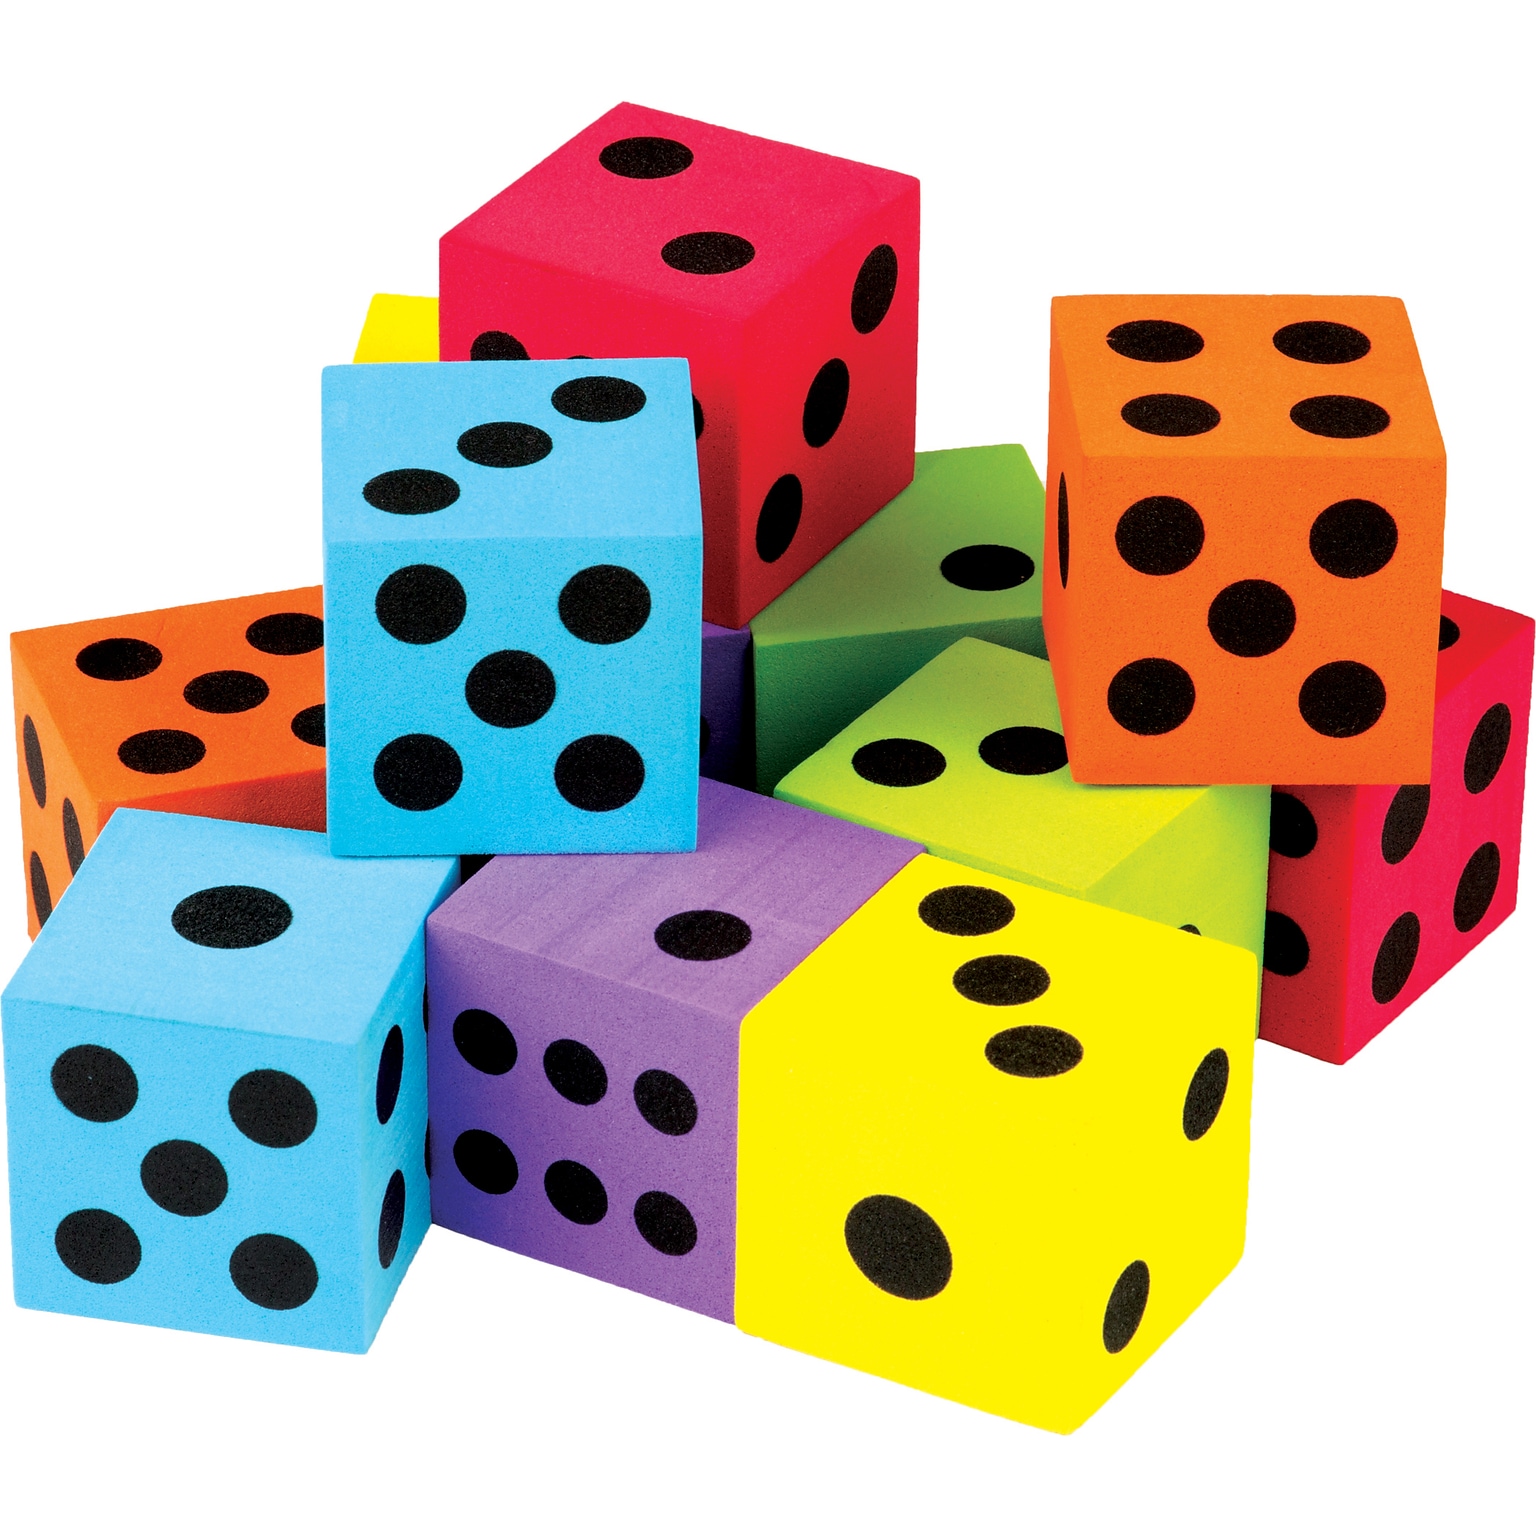 Teacher Created Resources Colorful Large Foam Dice, 12 Per Pack, 3 Packs (TCR20809)